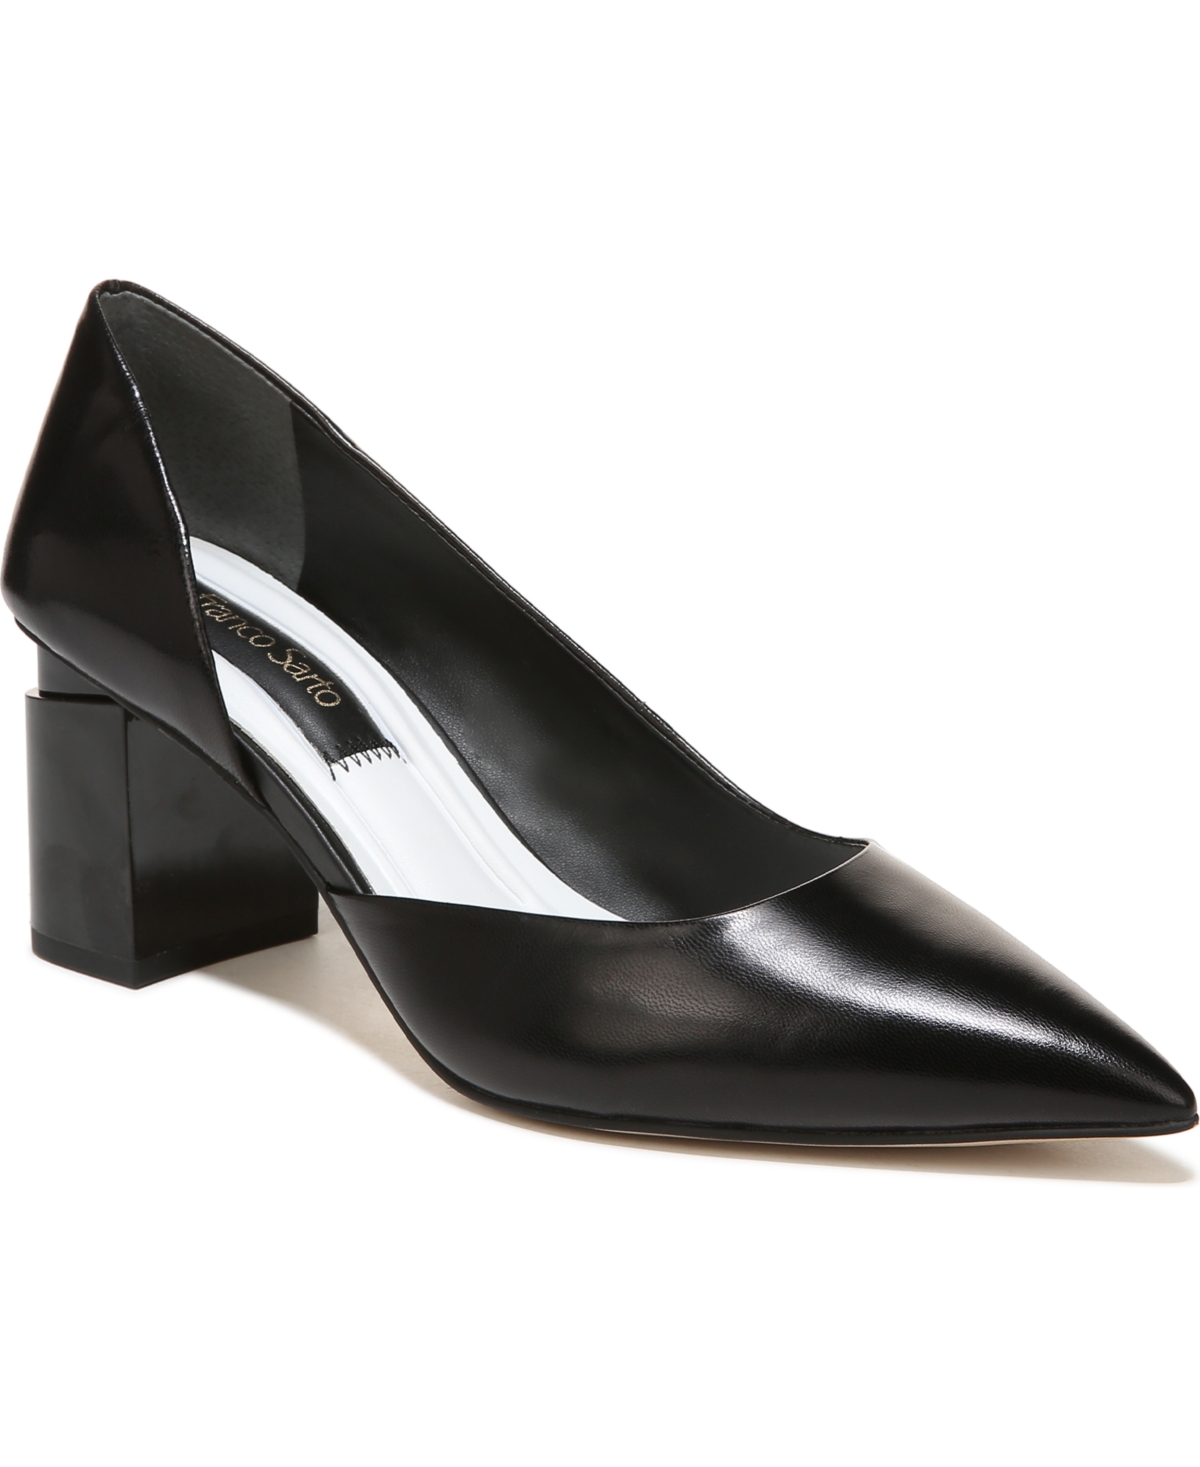 Lucy Pointed Toe Block Heel Pumps - Black Leather